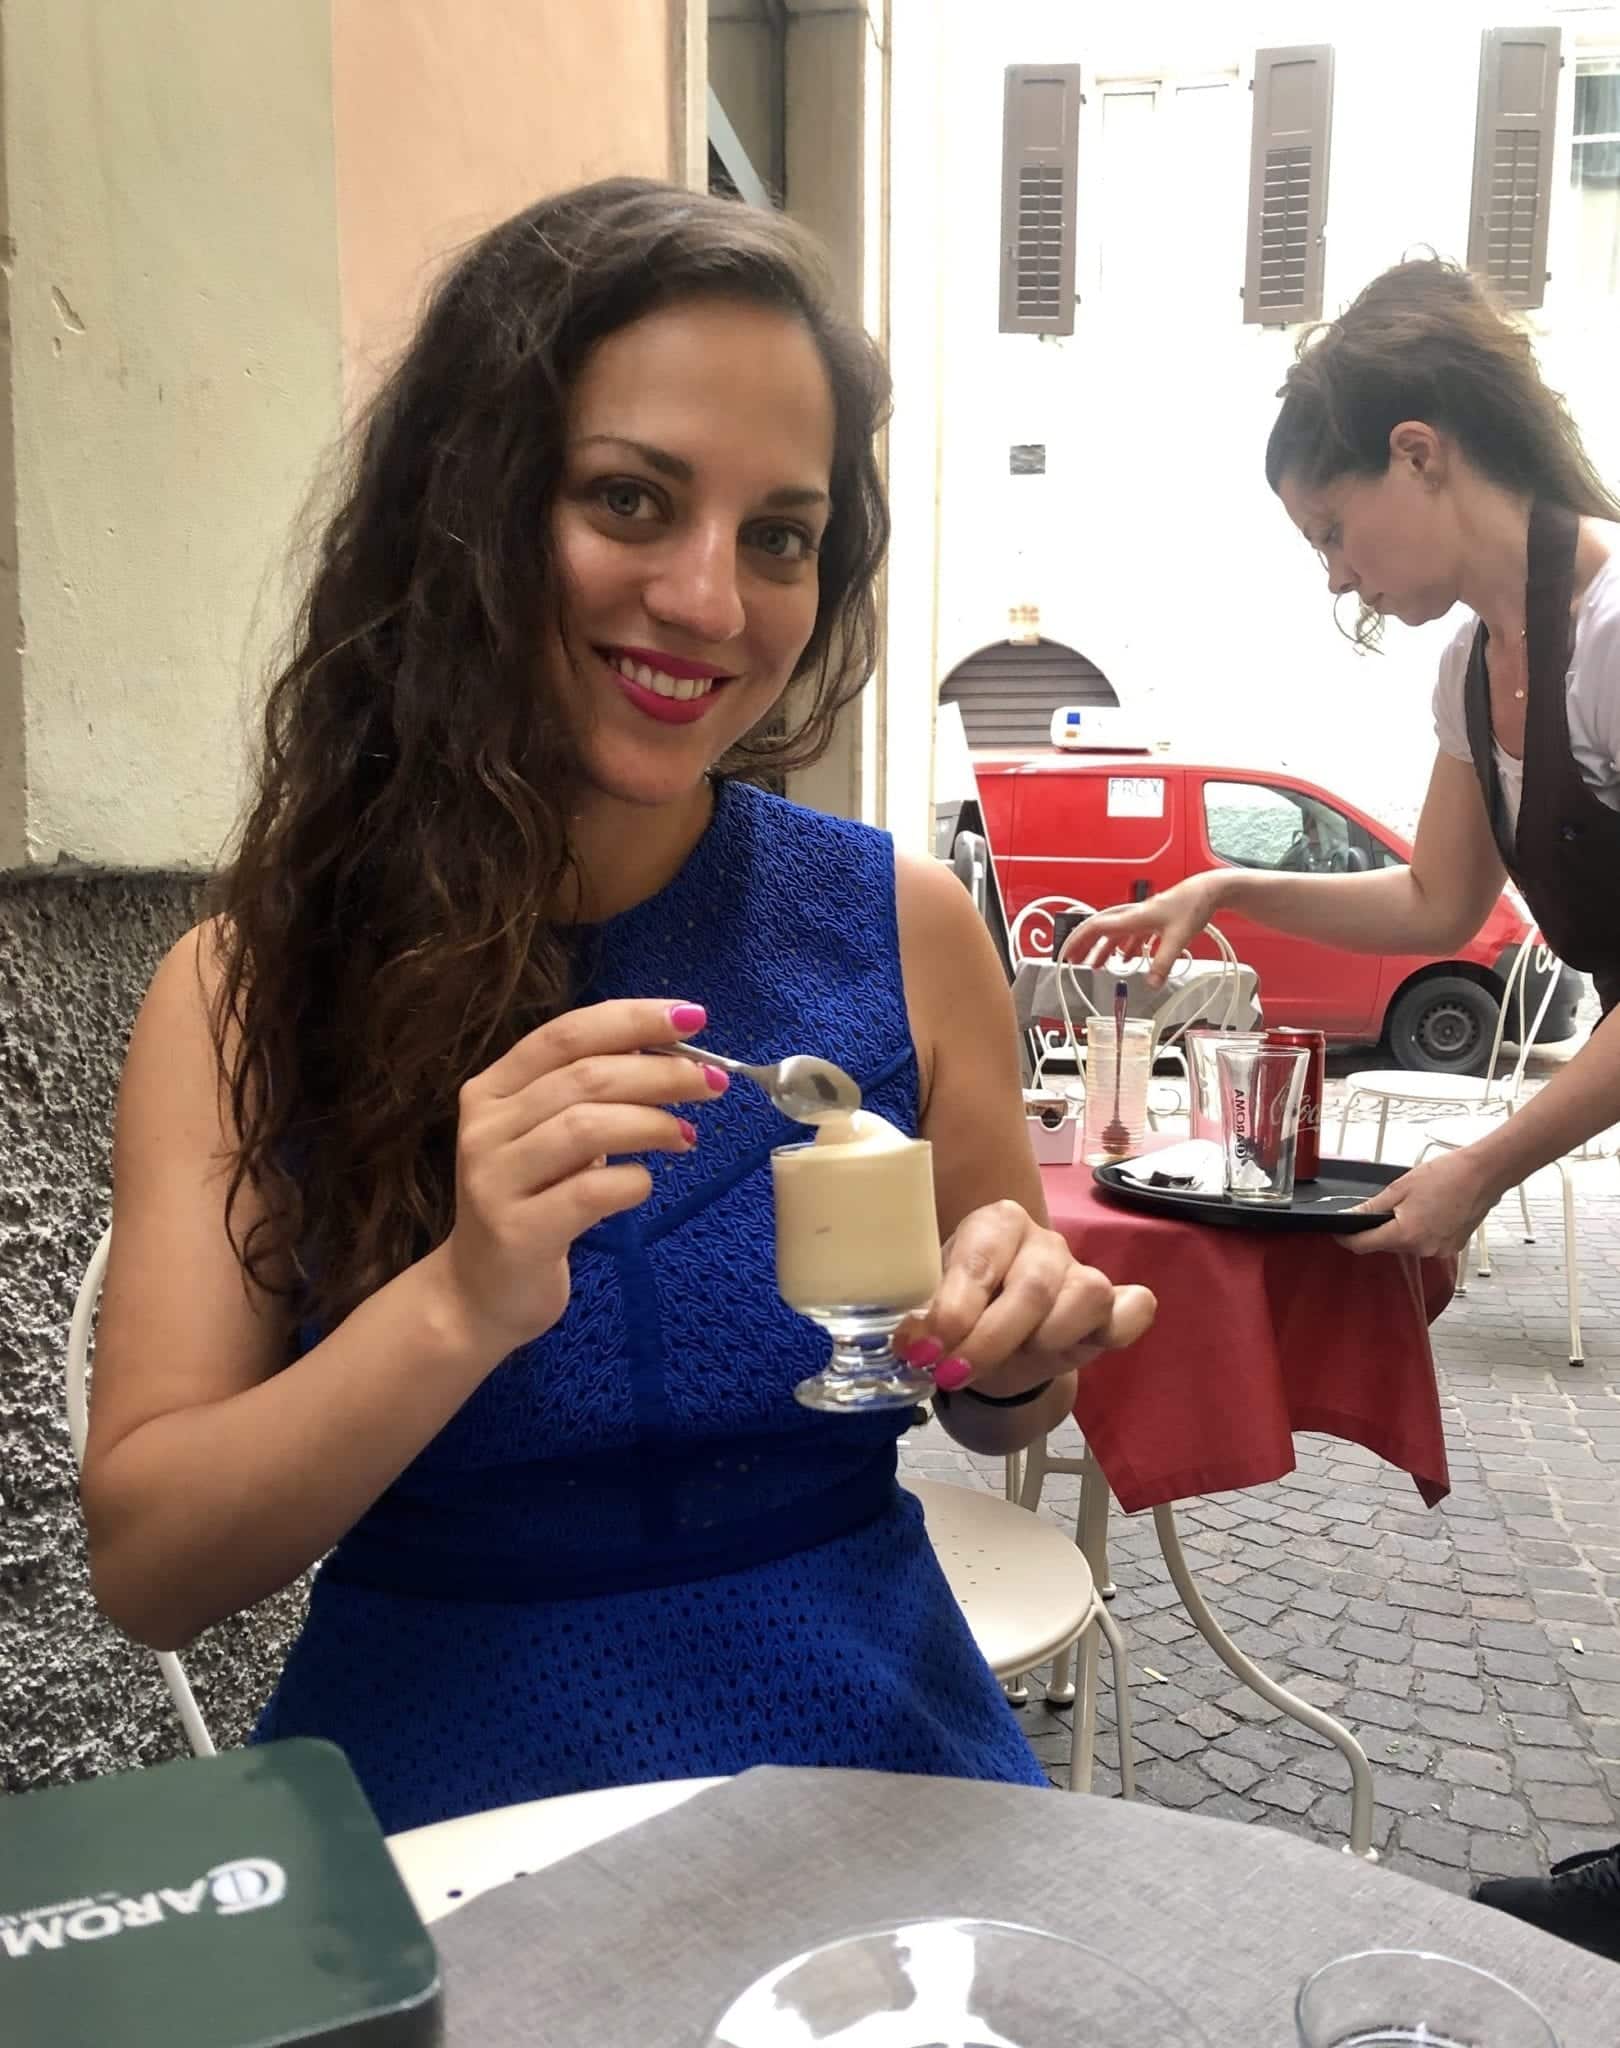 Kate wears a royal blue Pinko dress that goes up to her neck and has a transparent lacy fabric. Her hair is down a curly and she holds a cafe crema (soft serve espresso) in her hand. She is sitting at a sidewalk cafe in Trento.